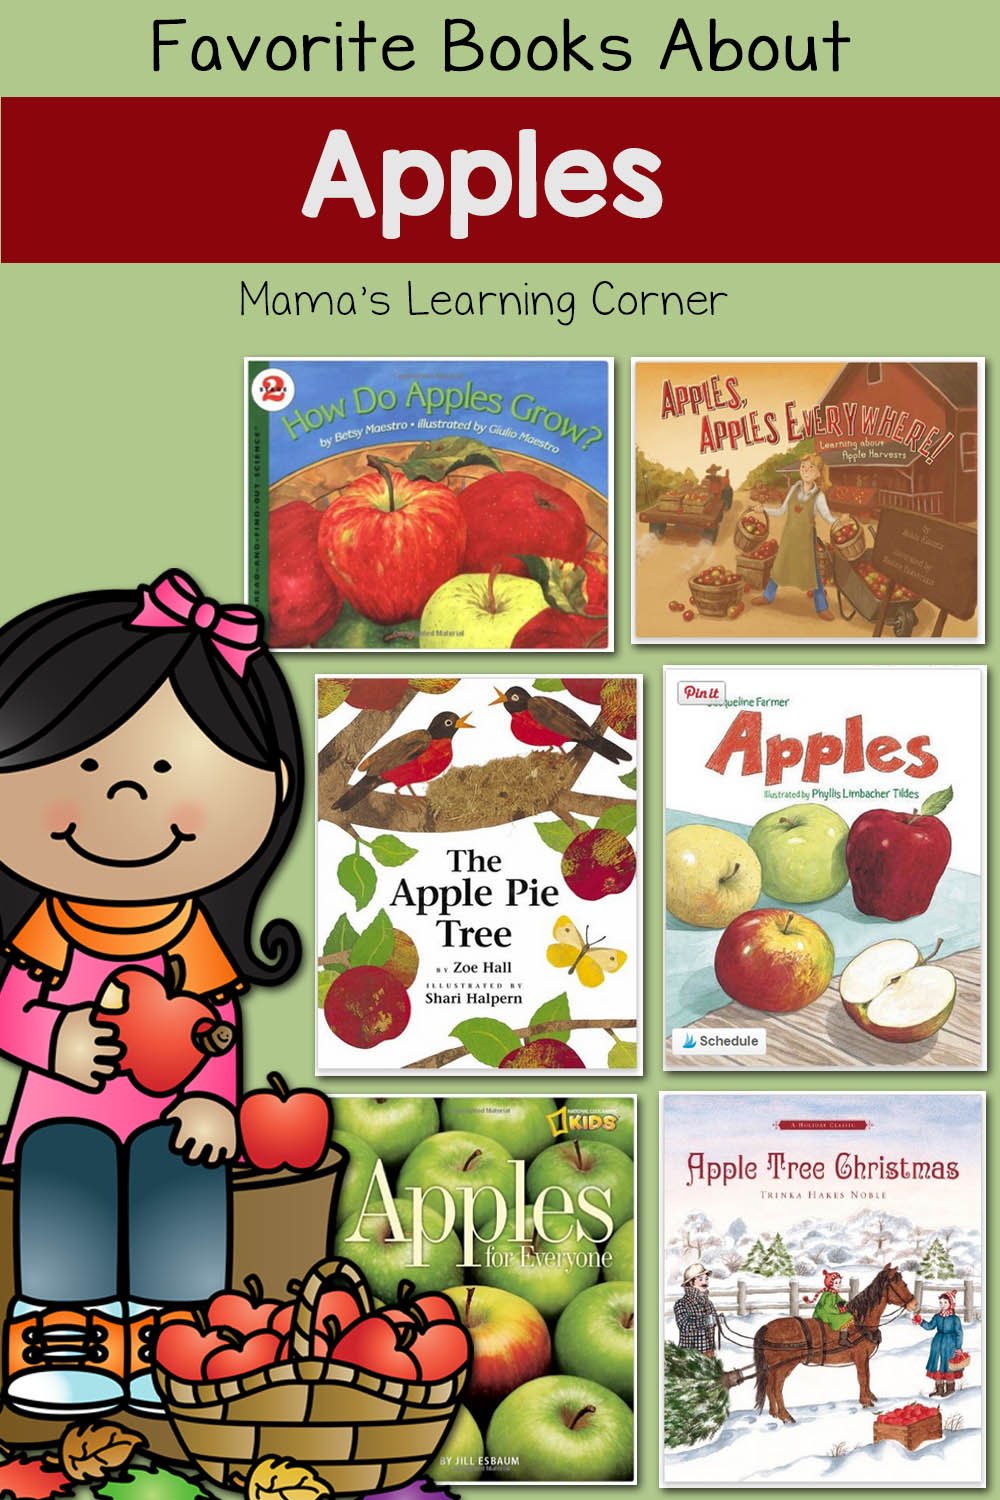 Our Favorite Books About Apples! - Mamas Learning Corner